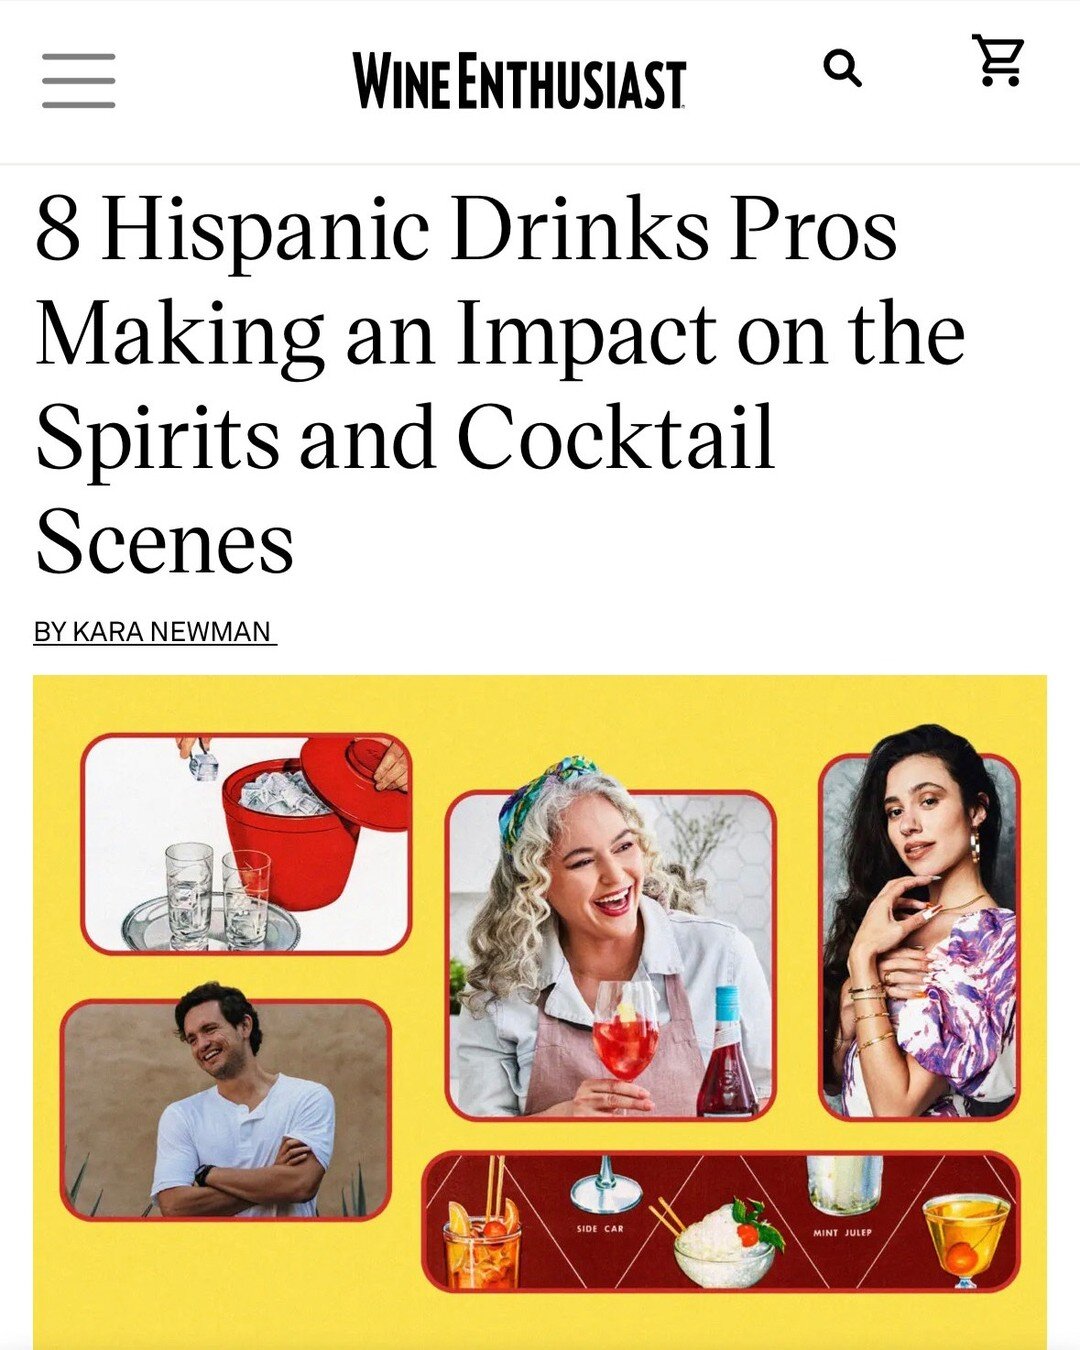 So proud of @lyannasanabria for being included in this list from @wineenthusiast!

Across the industry, Hispanics are behind complex drinks that incorporate ingredients, techniques and points of view from their respective homelands.

#PapiPortland #P